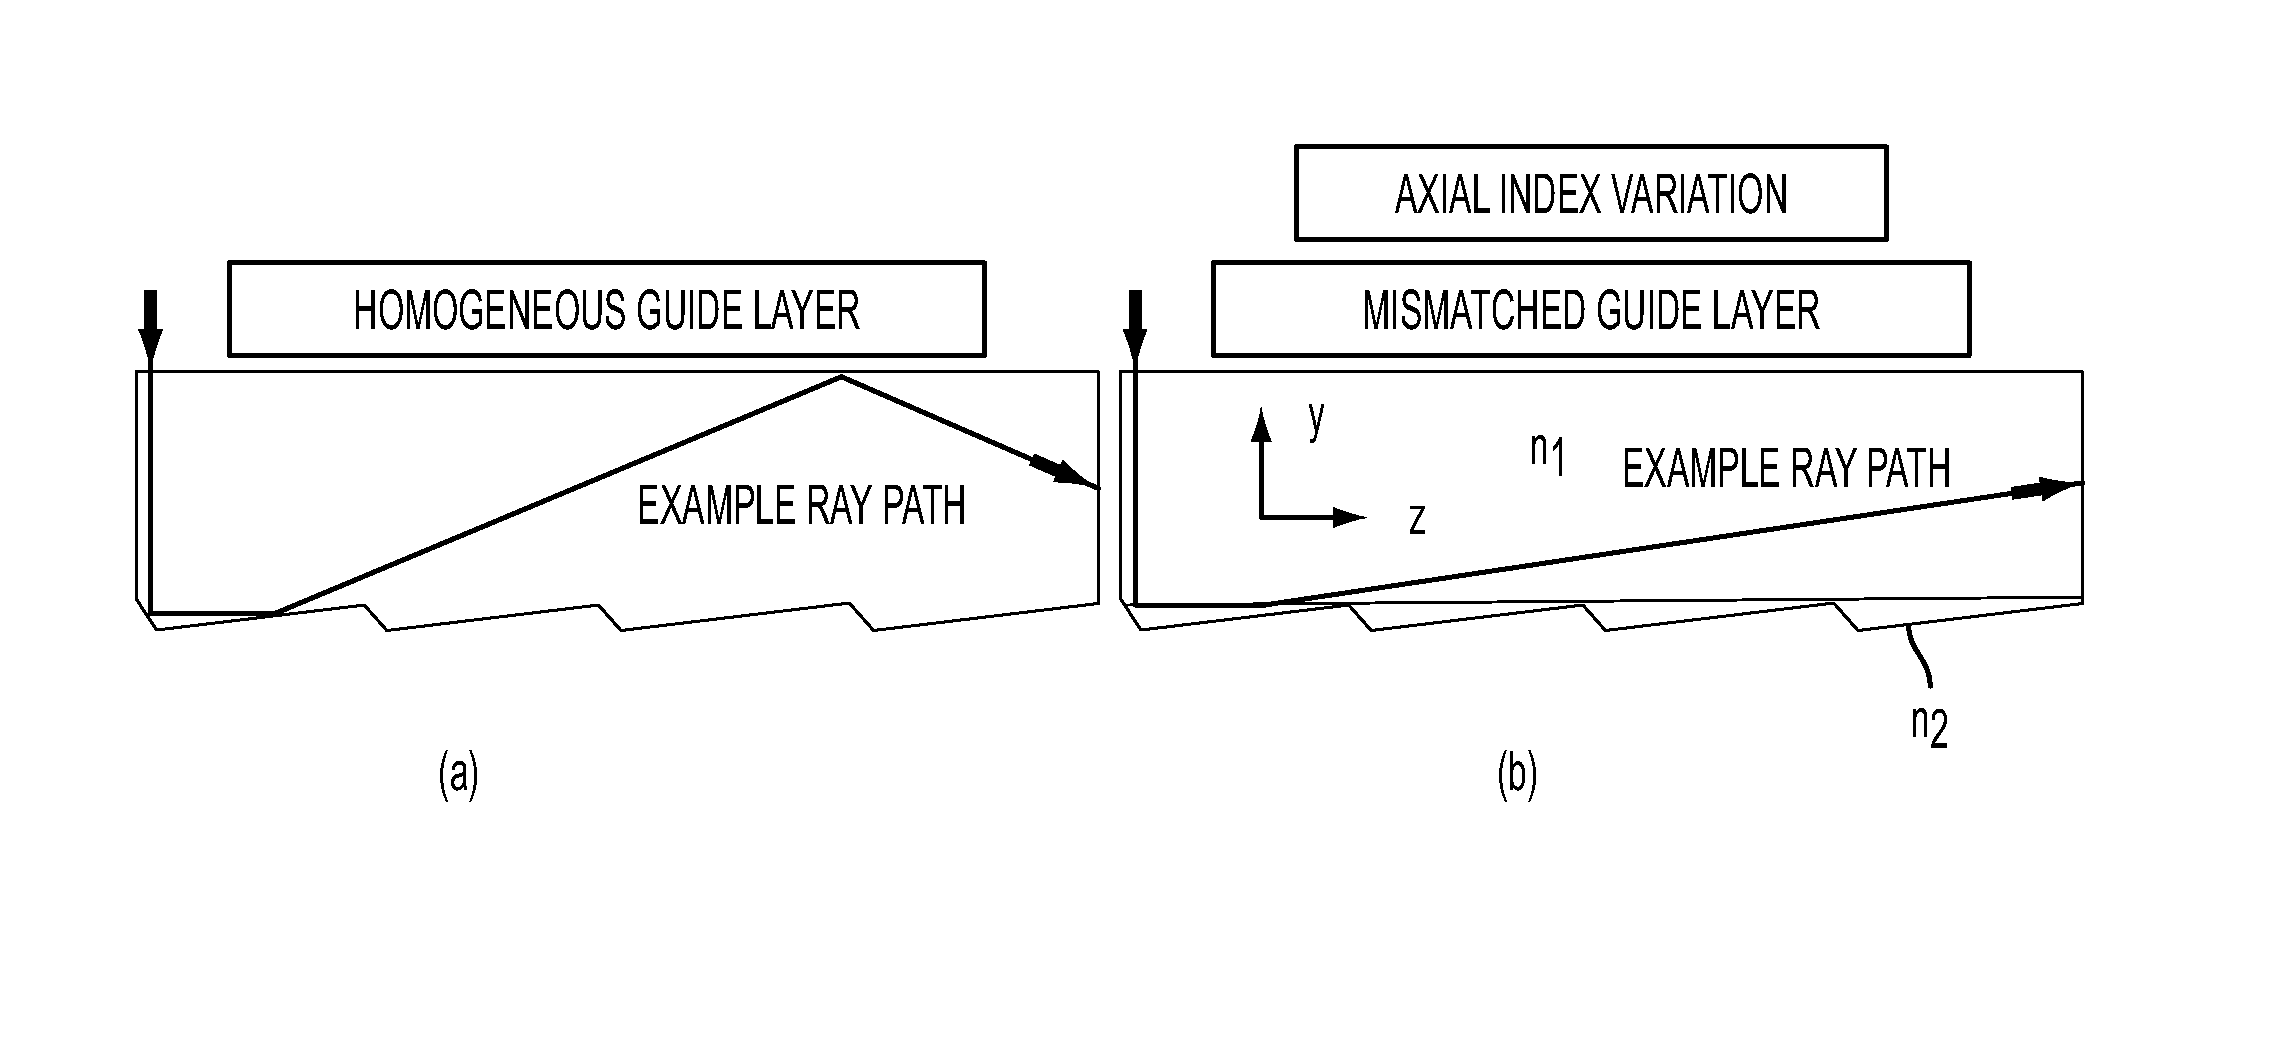 Light collecting and emitting apparatus, method, and applications